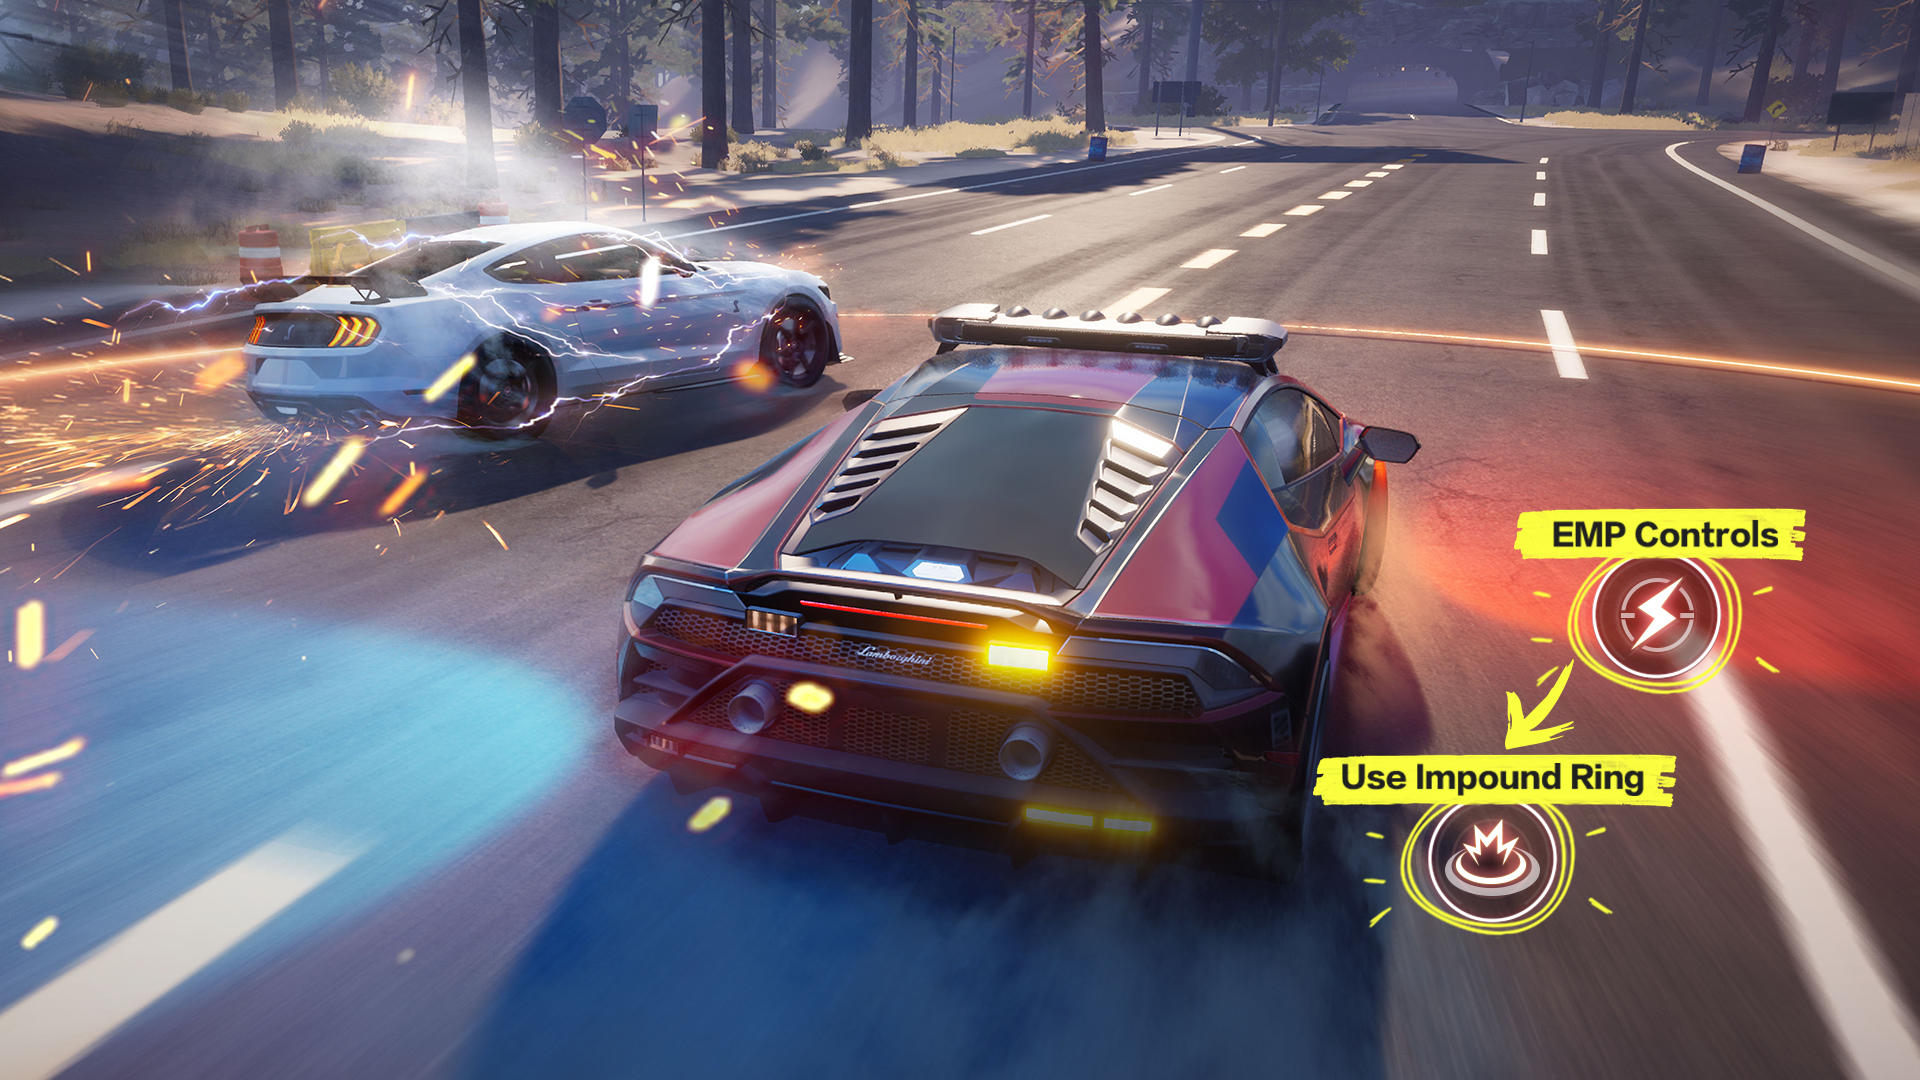 NEED FOR SPEED WORLD ONLINE IN 2020! 